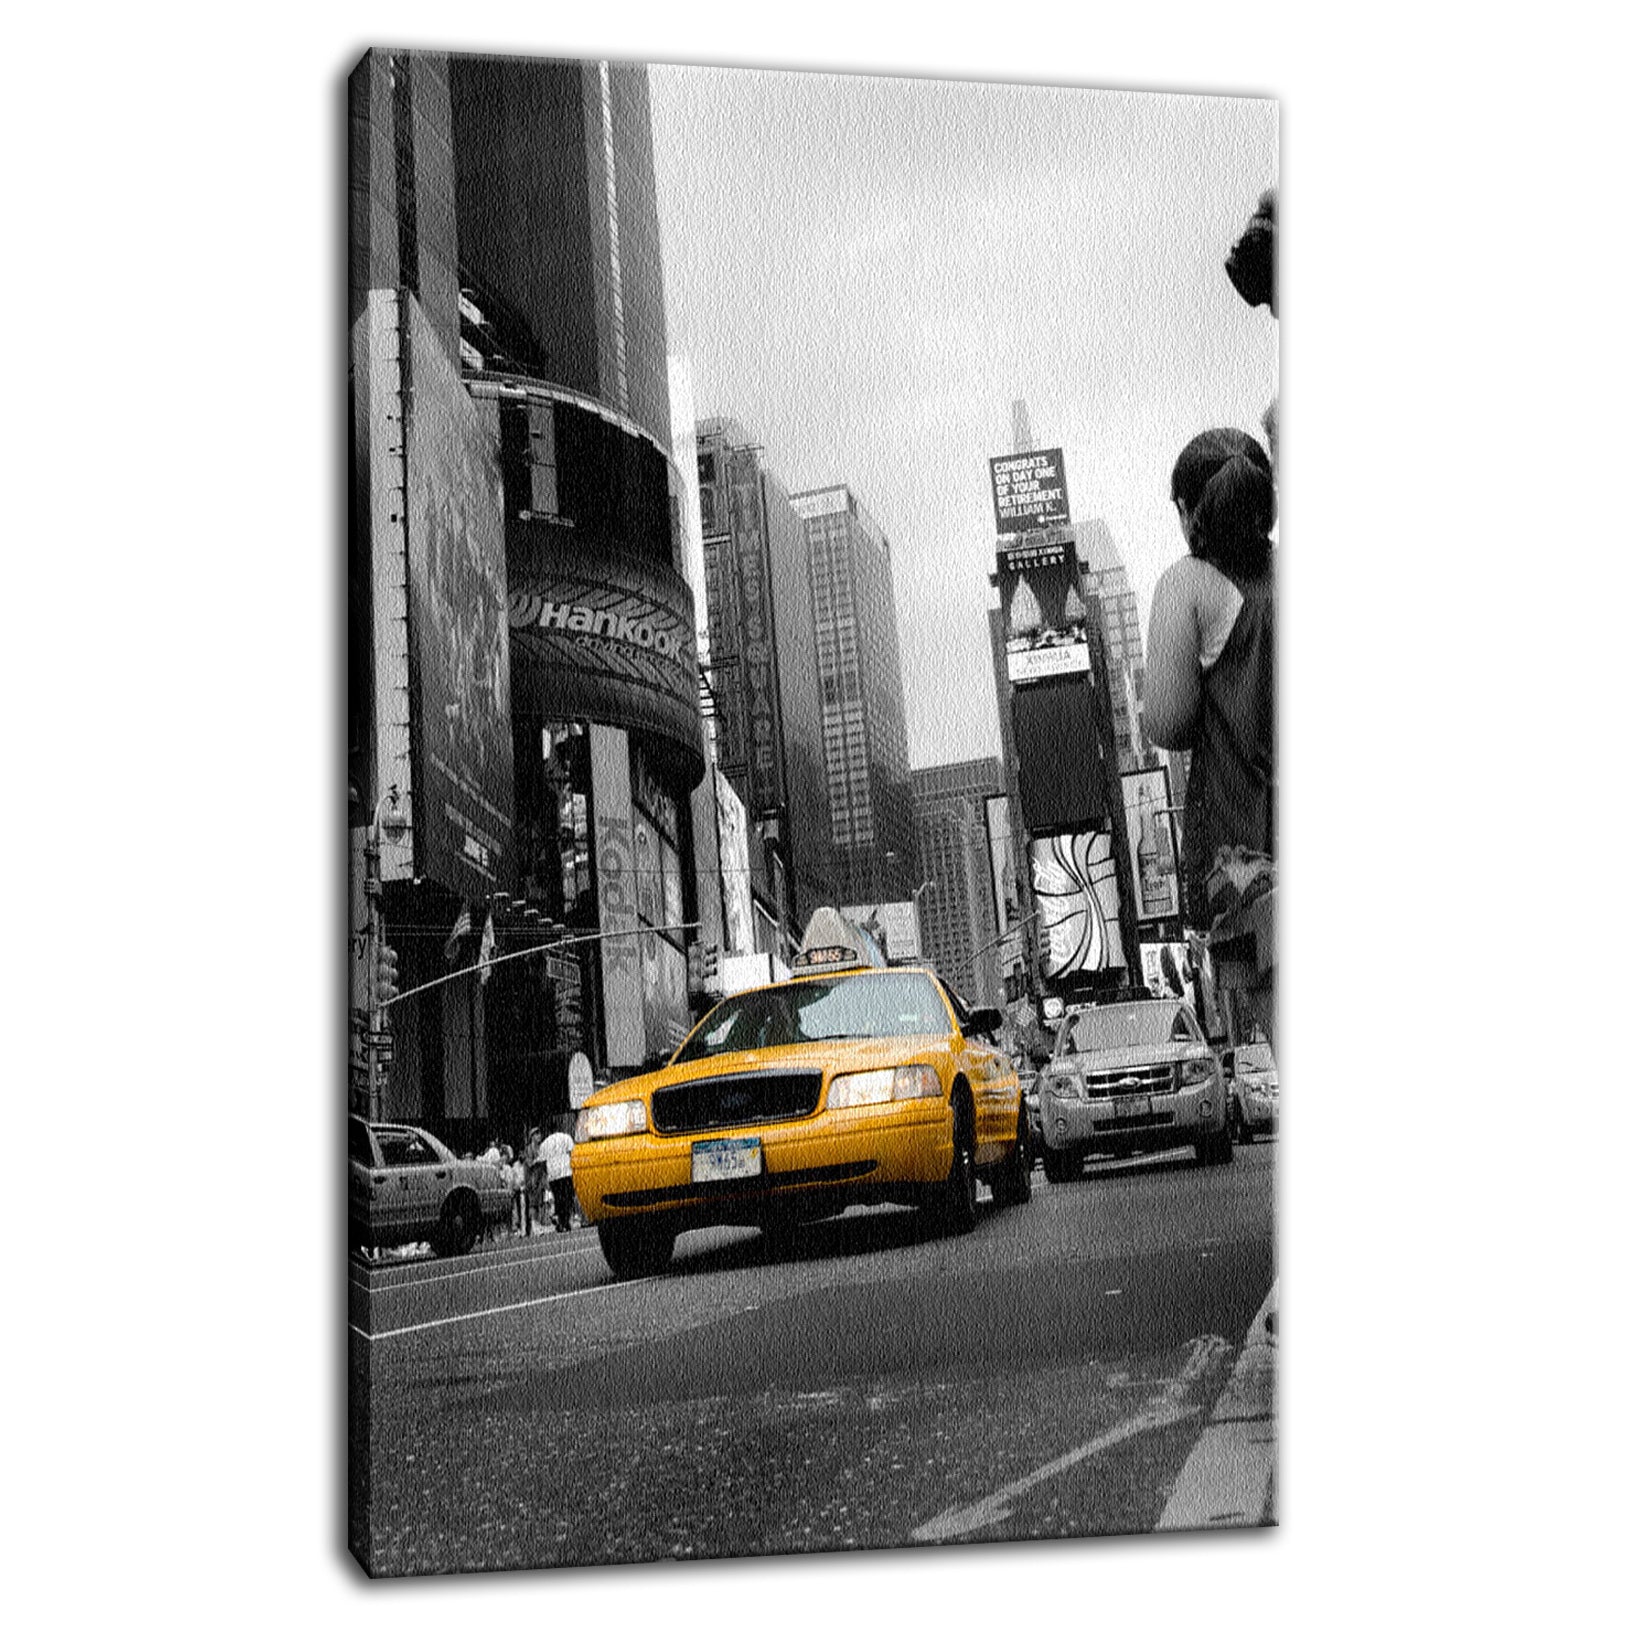 Shining Taxi Cab - Black and White Abstract Photo Fine Art Canvas & Unframed Wall Art Prints  - PIPAFINEART